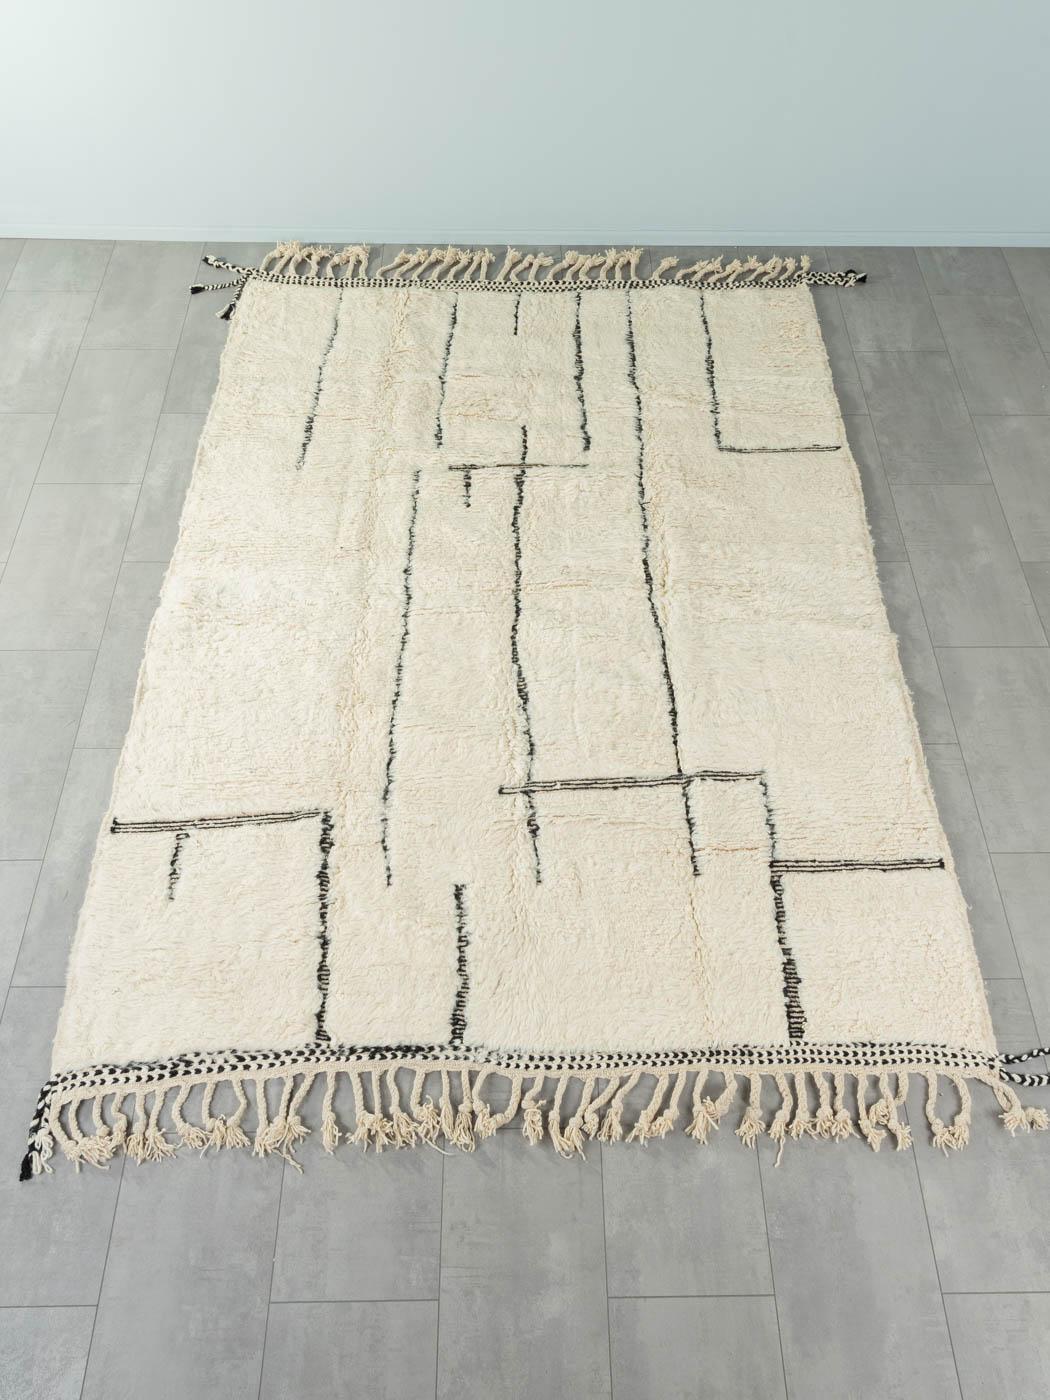 Soft Sky is a contemporary 100% wool rug – thick and soft, comfortable underfoot. Our Berber rugs are handwoven and handknotted by Amazigh women in the Atlas Mountains. These communities have been crafting rugs for thousands of years. One knot at a